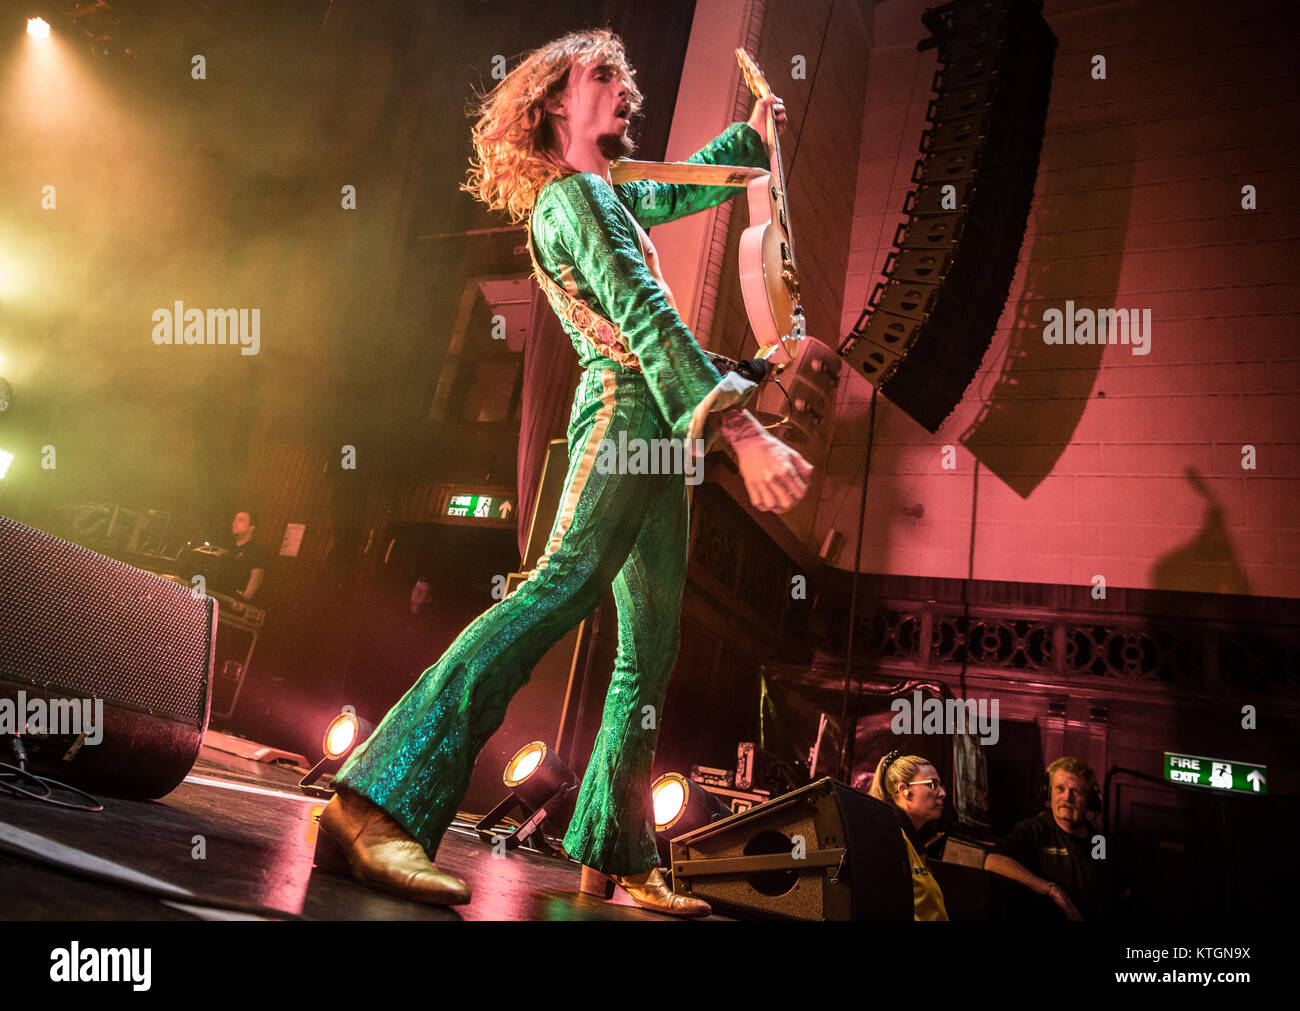 The Darkness performing live on stage at the O2 Guildhall Southampton in Southampton, Hampshire.  Featuring: The Darkness, Justin Hawkins Where: Southampton, Hampshire, United Kingdom When: 23 Nov 2017 Credit: WENN.com Stock Photo